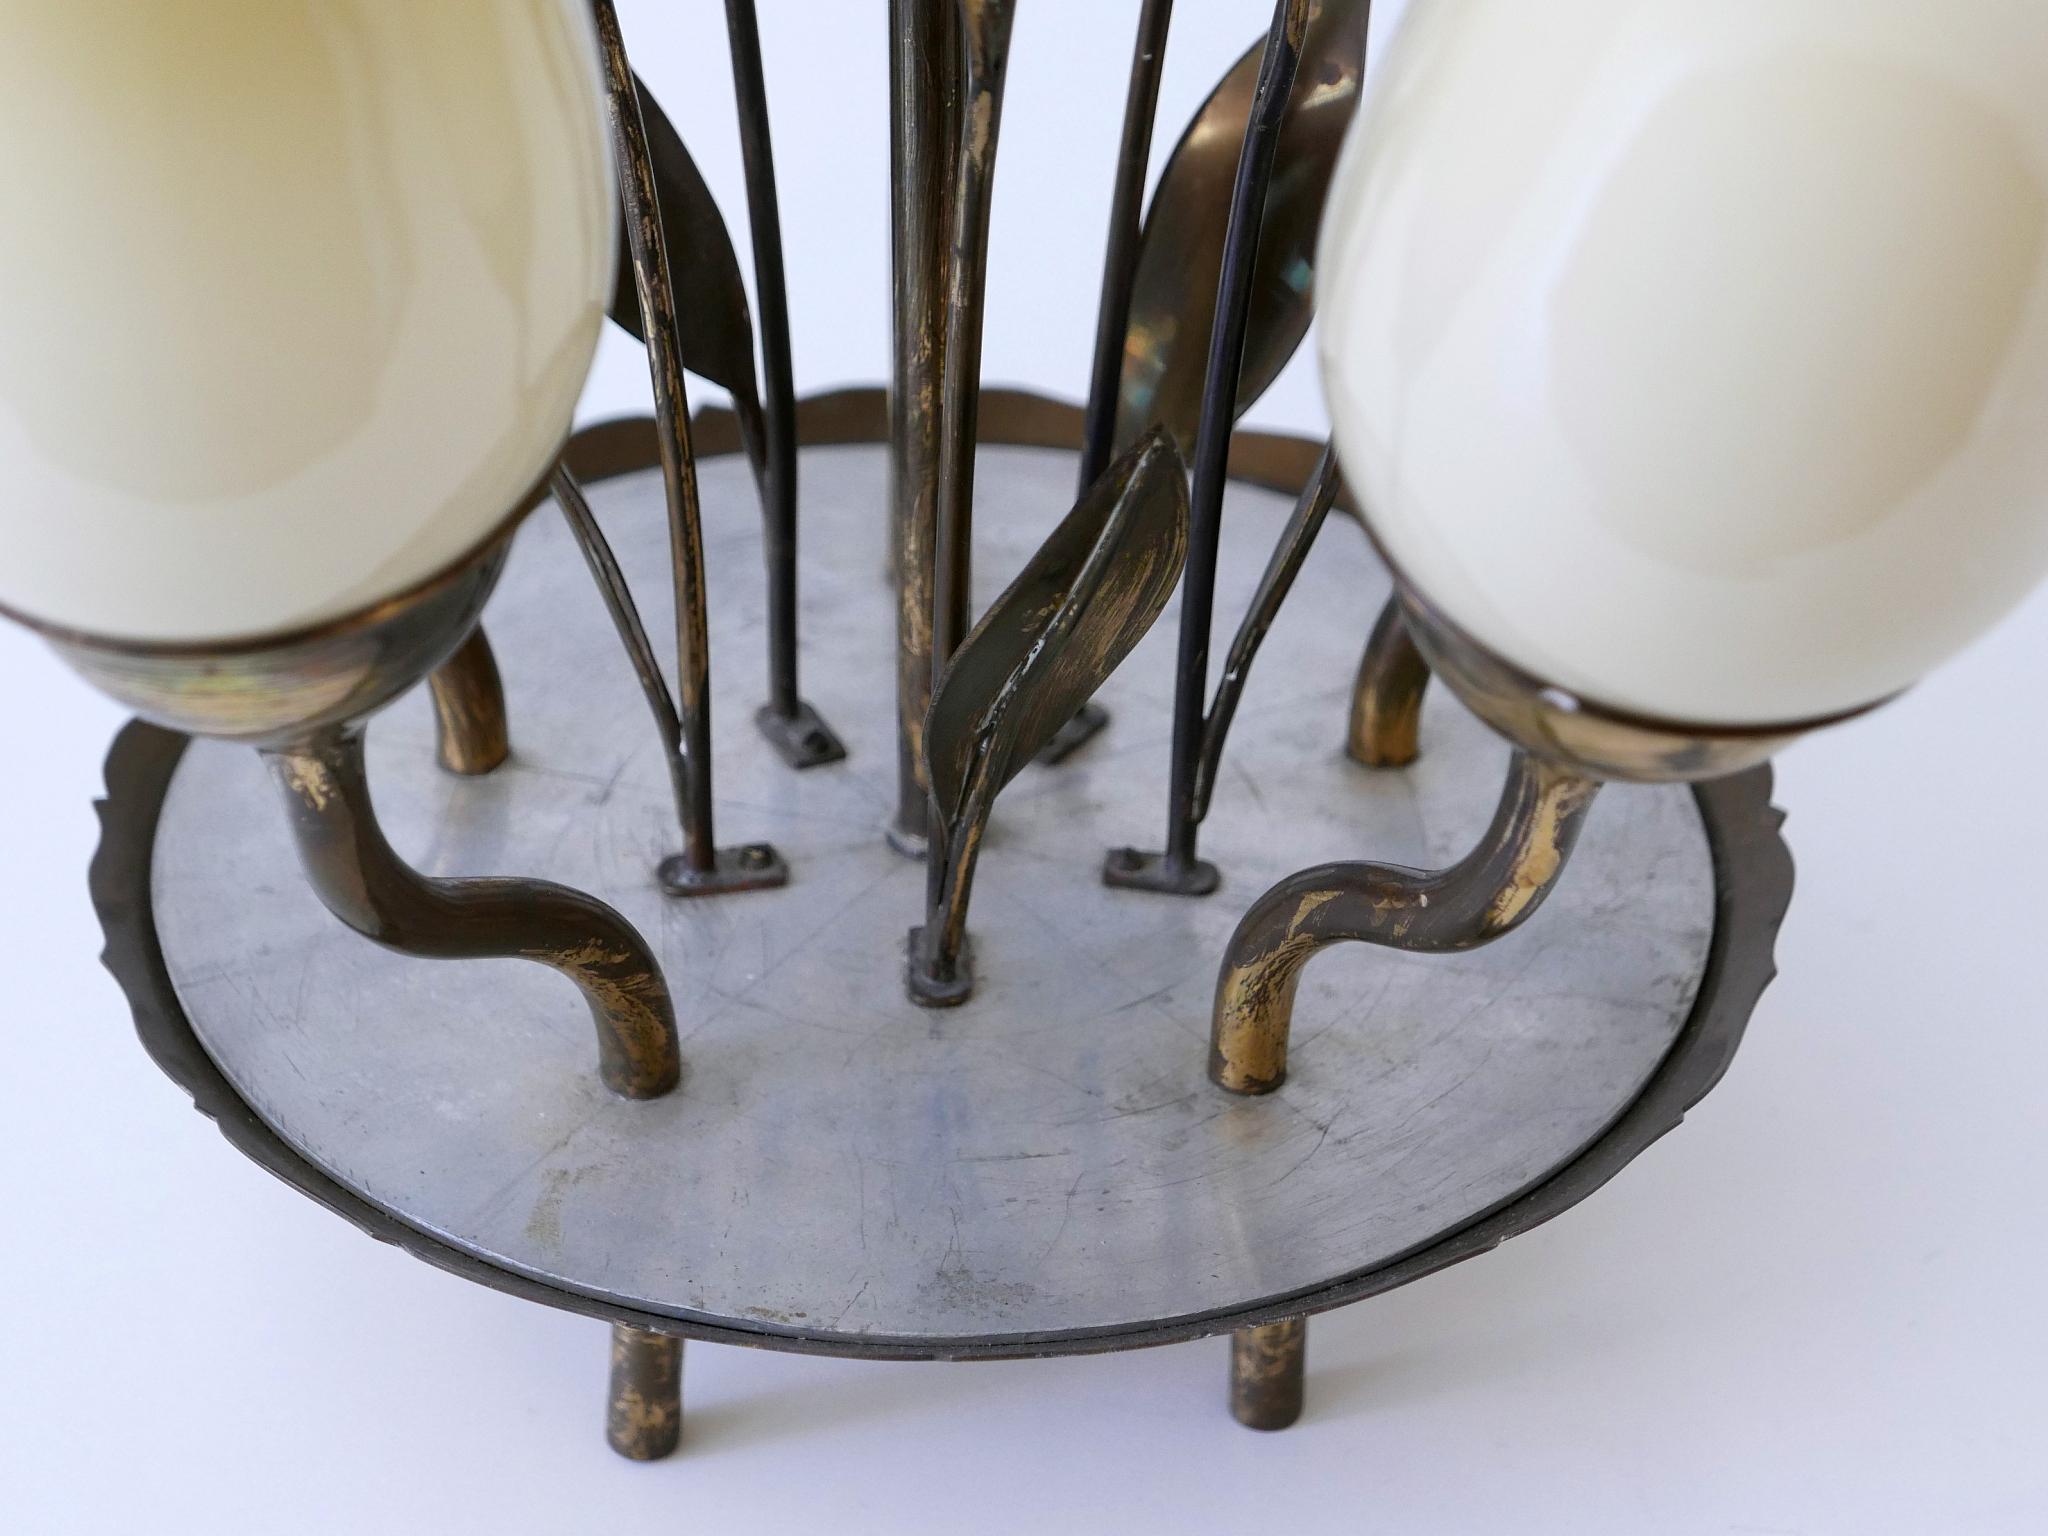 Exceptional Scandinavian Brass & Opal Glass Chandelier or Ceiling Lamp, 1950s For Sale 9